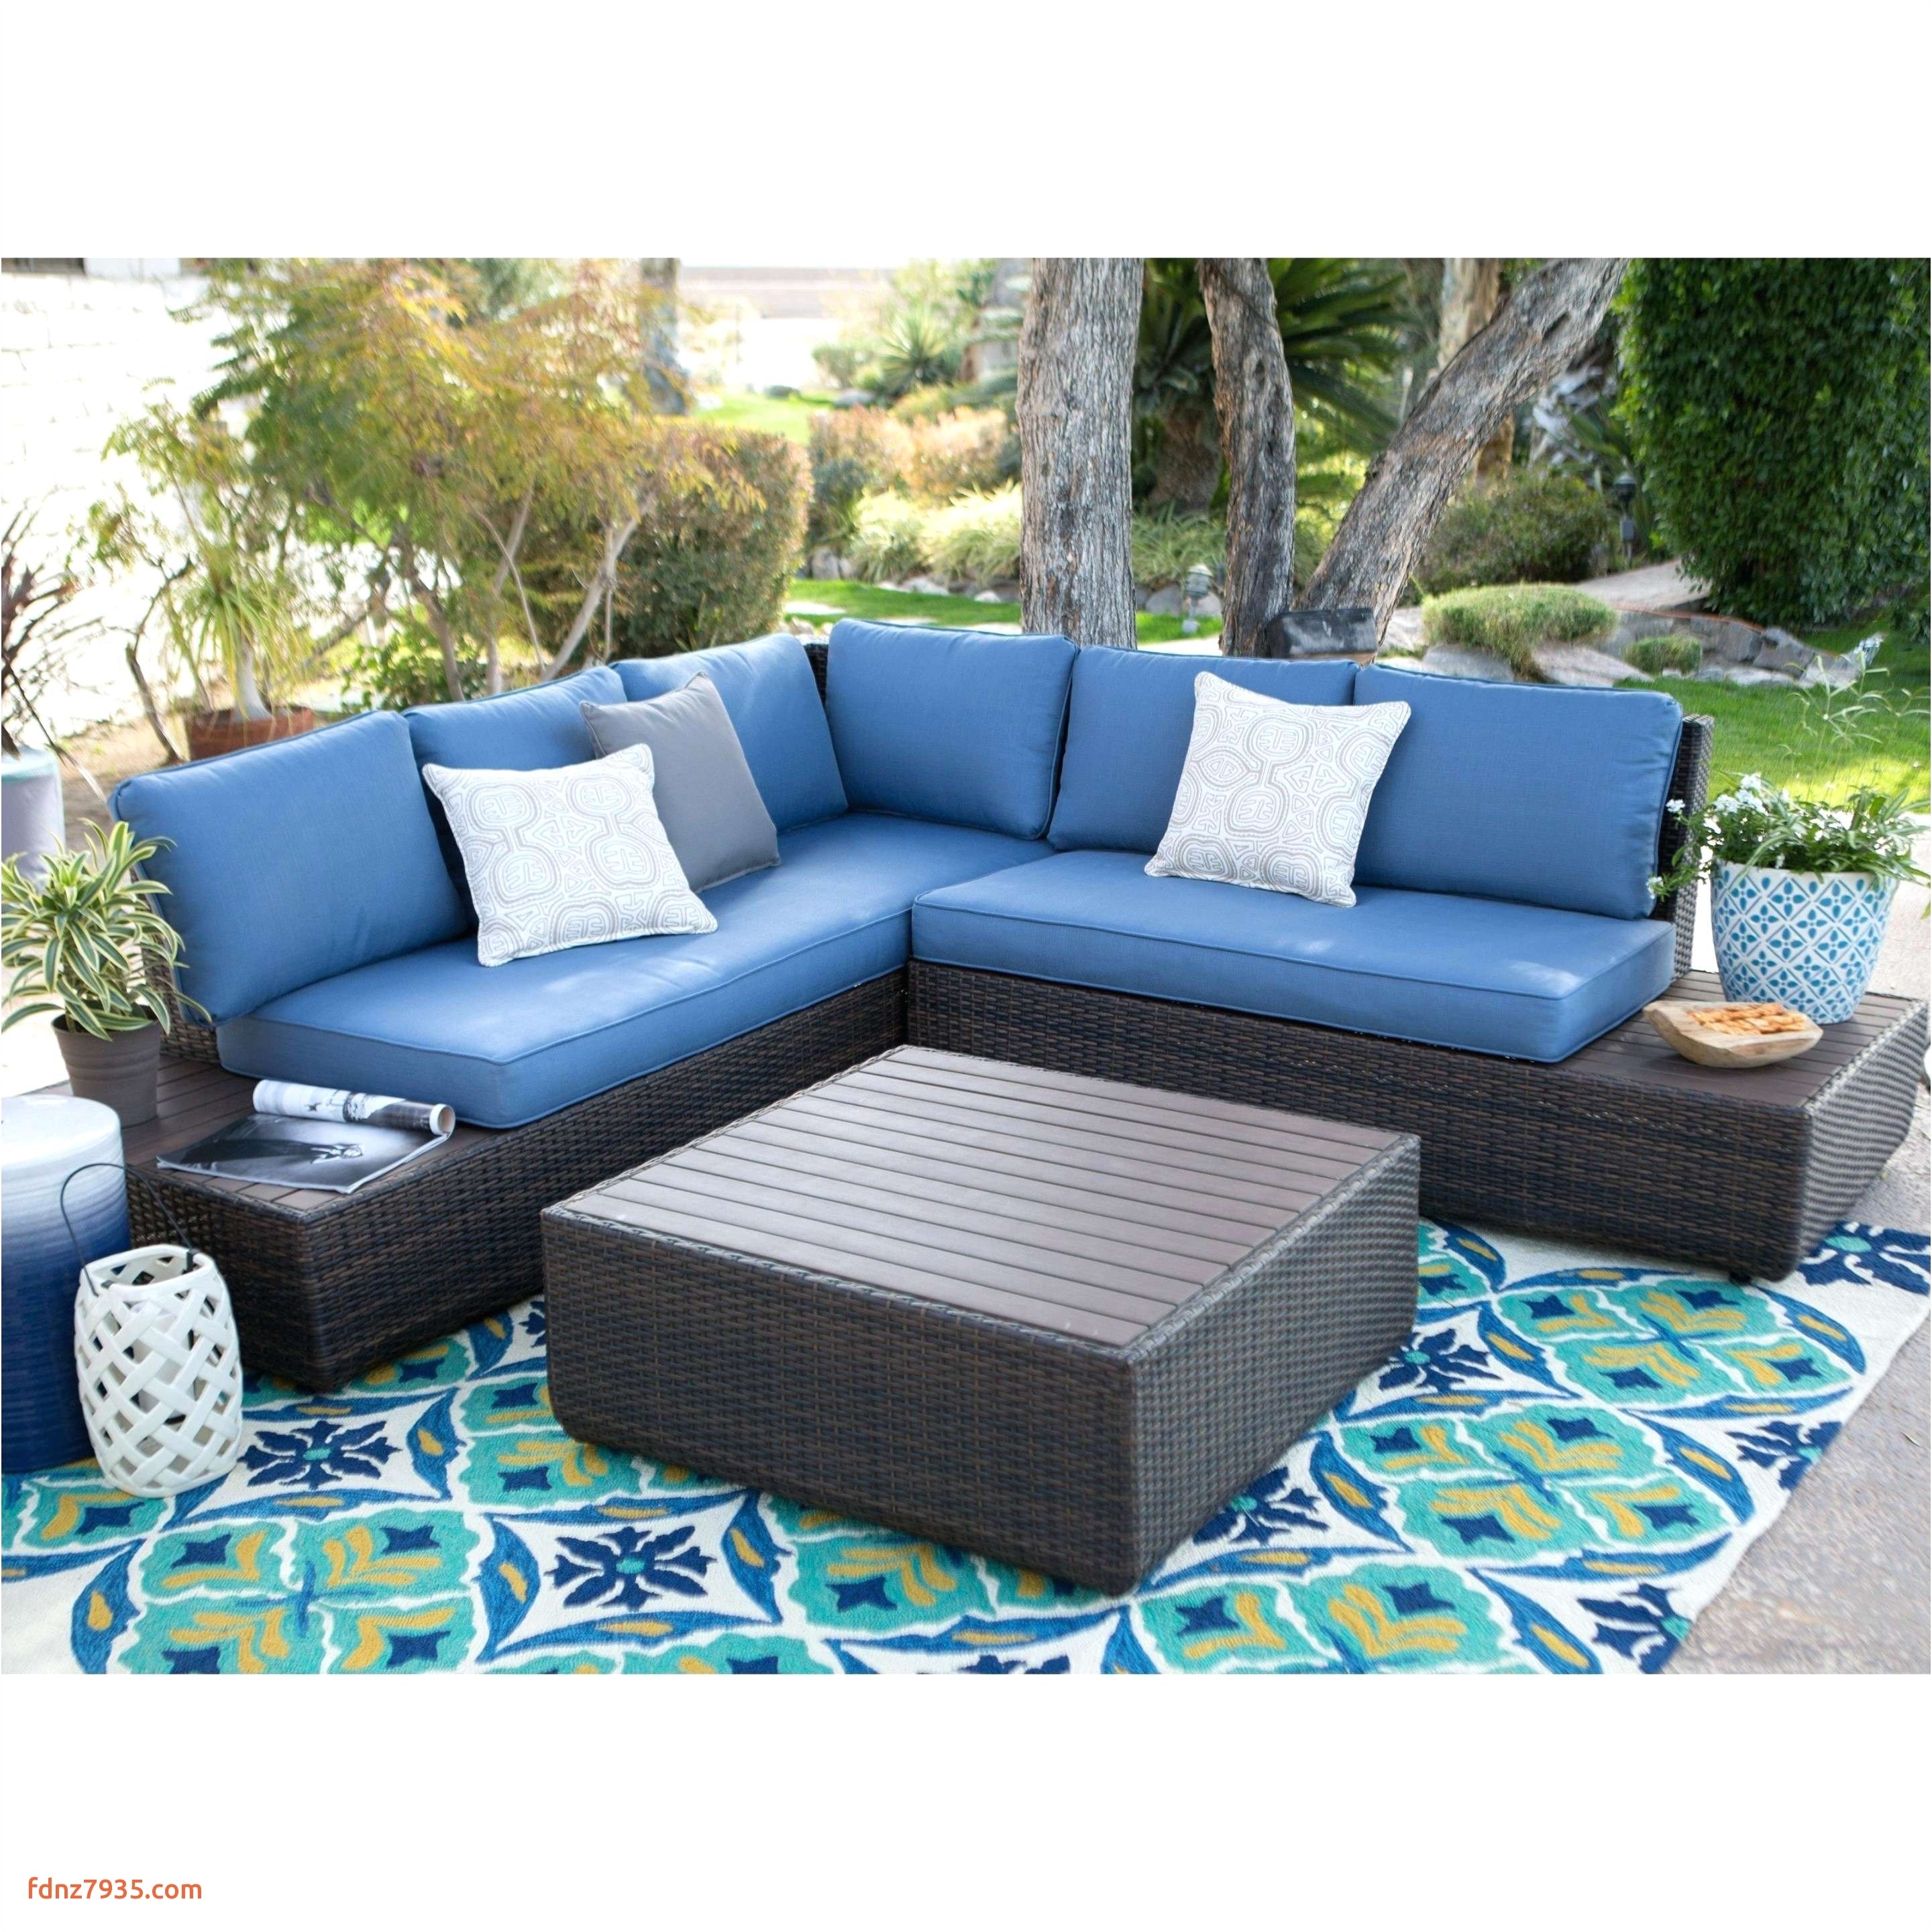 augusta couch sales new furniture loveseat cushions awesome wicker outdoor sofa 0d patio couch sales random